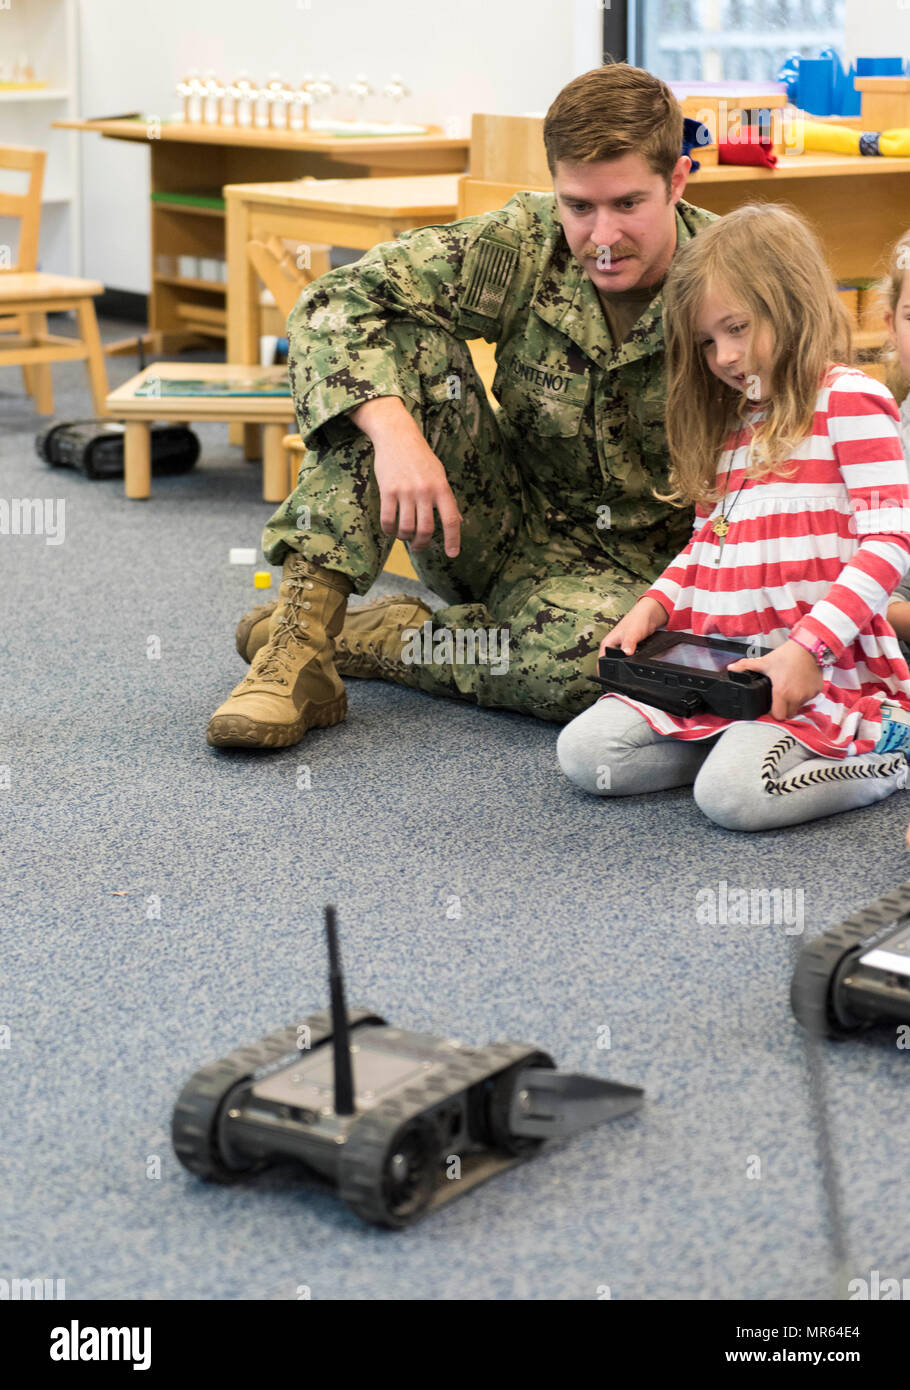 170512-N-SF508-041 NORFOLK, Va. (May 12, 2017) Explosive Ordnance Disposal Technician 2nd Class Nicholas Fontenot, assigned to Explosive Ordnance Disposal Mobile Unit (EODMU) 12, shows a student how to drive a Small Unmanned Ground Vehicle (SUGV) during a community relations event at McDonald Montessori School in Norfolk, Va. EODMU 12 provides credible, combat-ready EOD forces capable of deploying anywhere, anytime in support of national interests. (U.S. Navy photo by Mass Communication Specialist 2nd Charles Oki/Released) Stock Photo